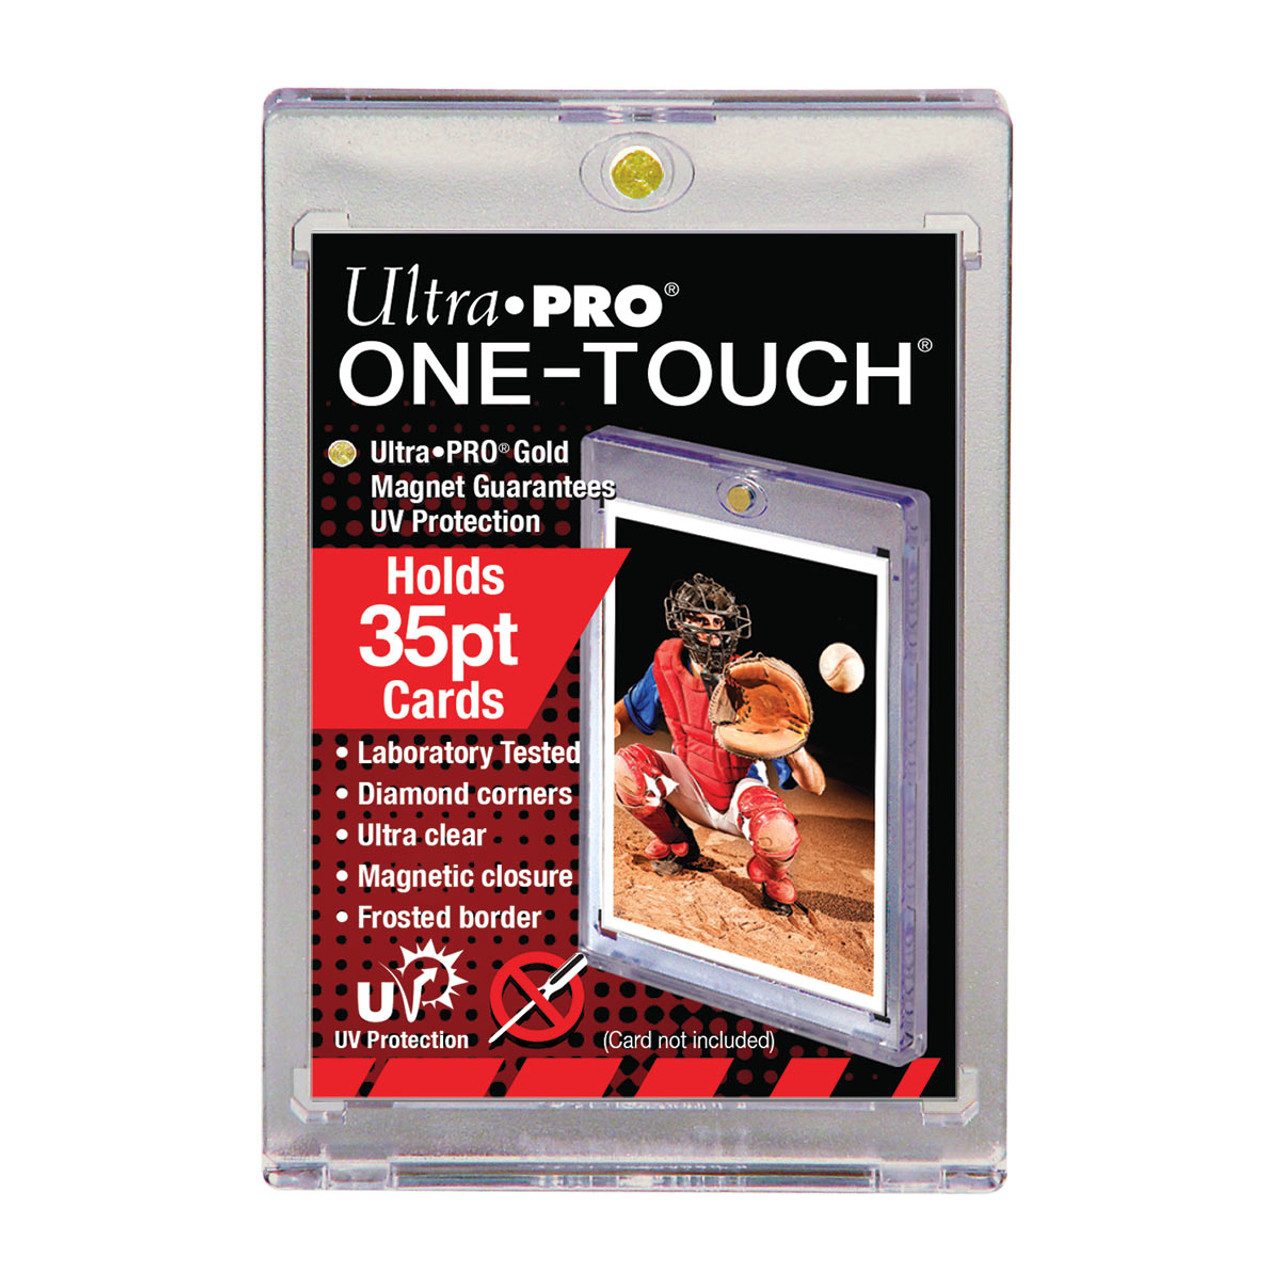 One Touch UV Card Holder with Magnet Closure - 35pt